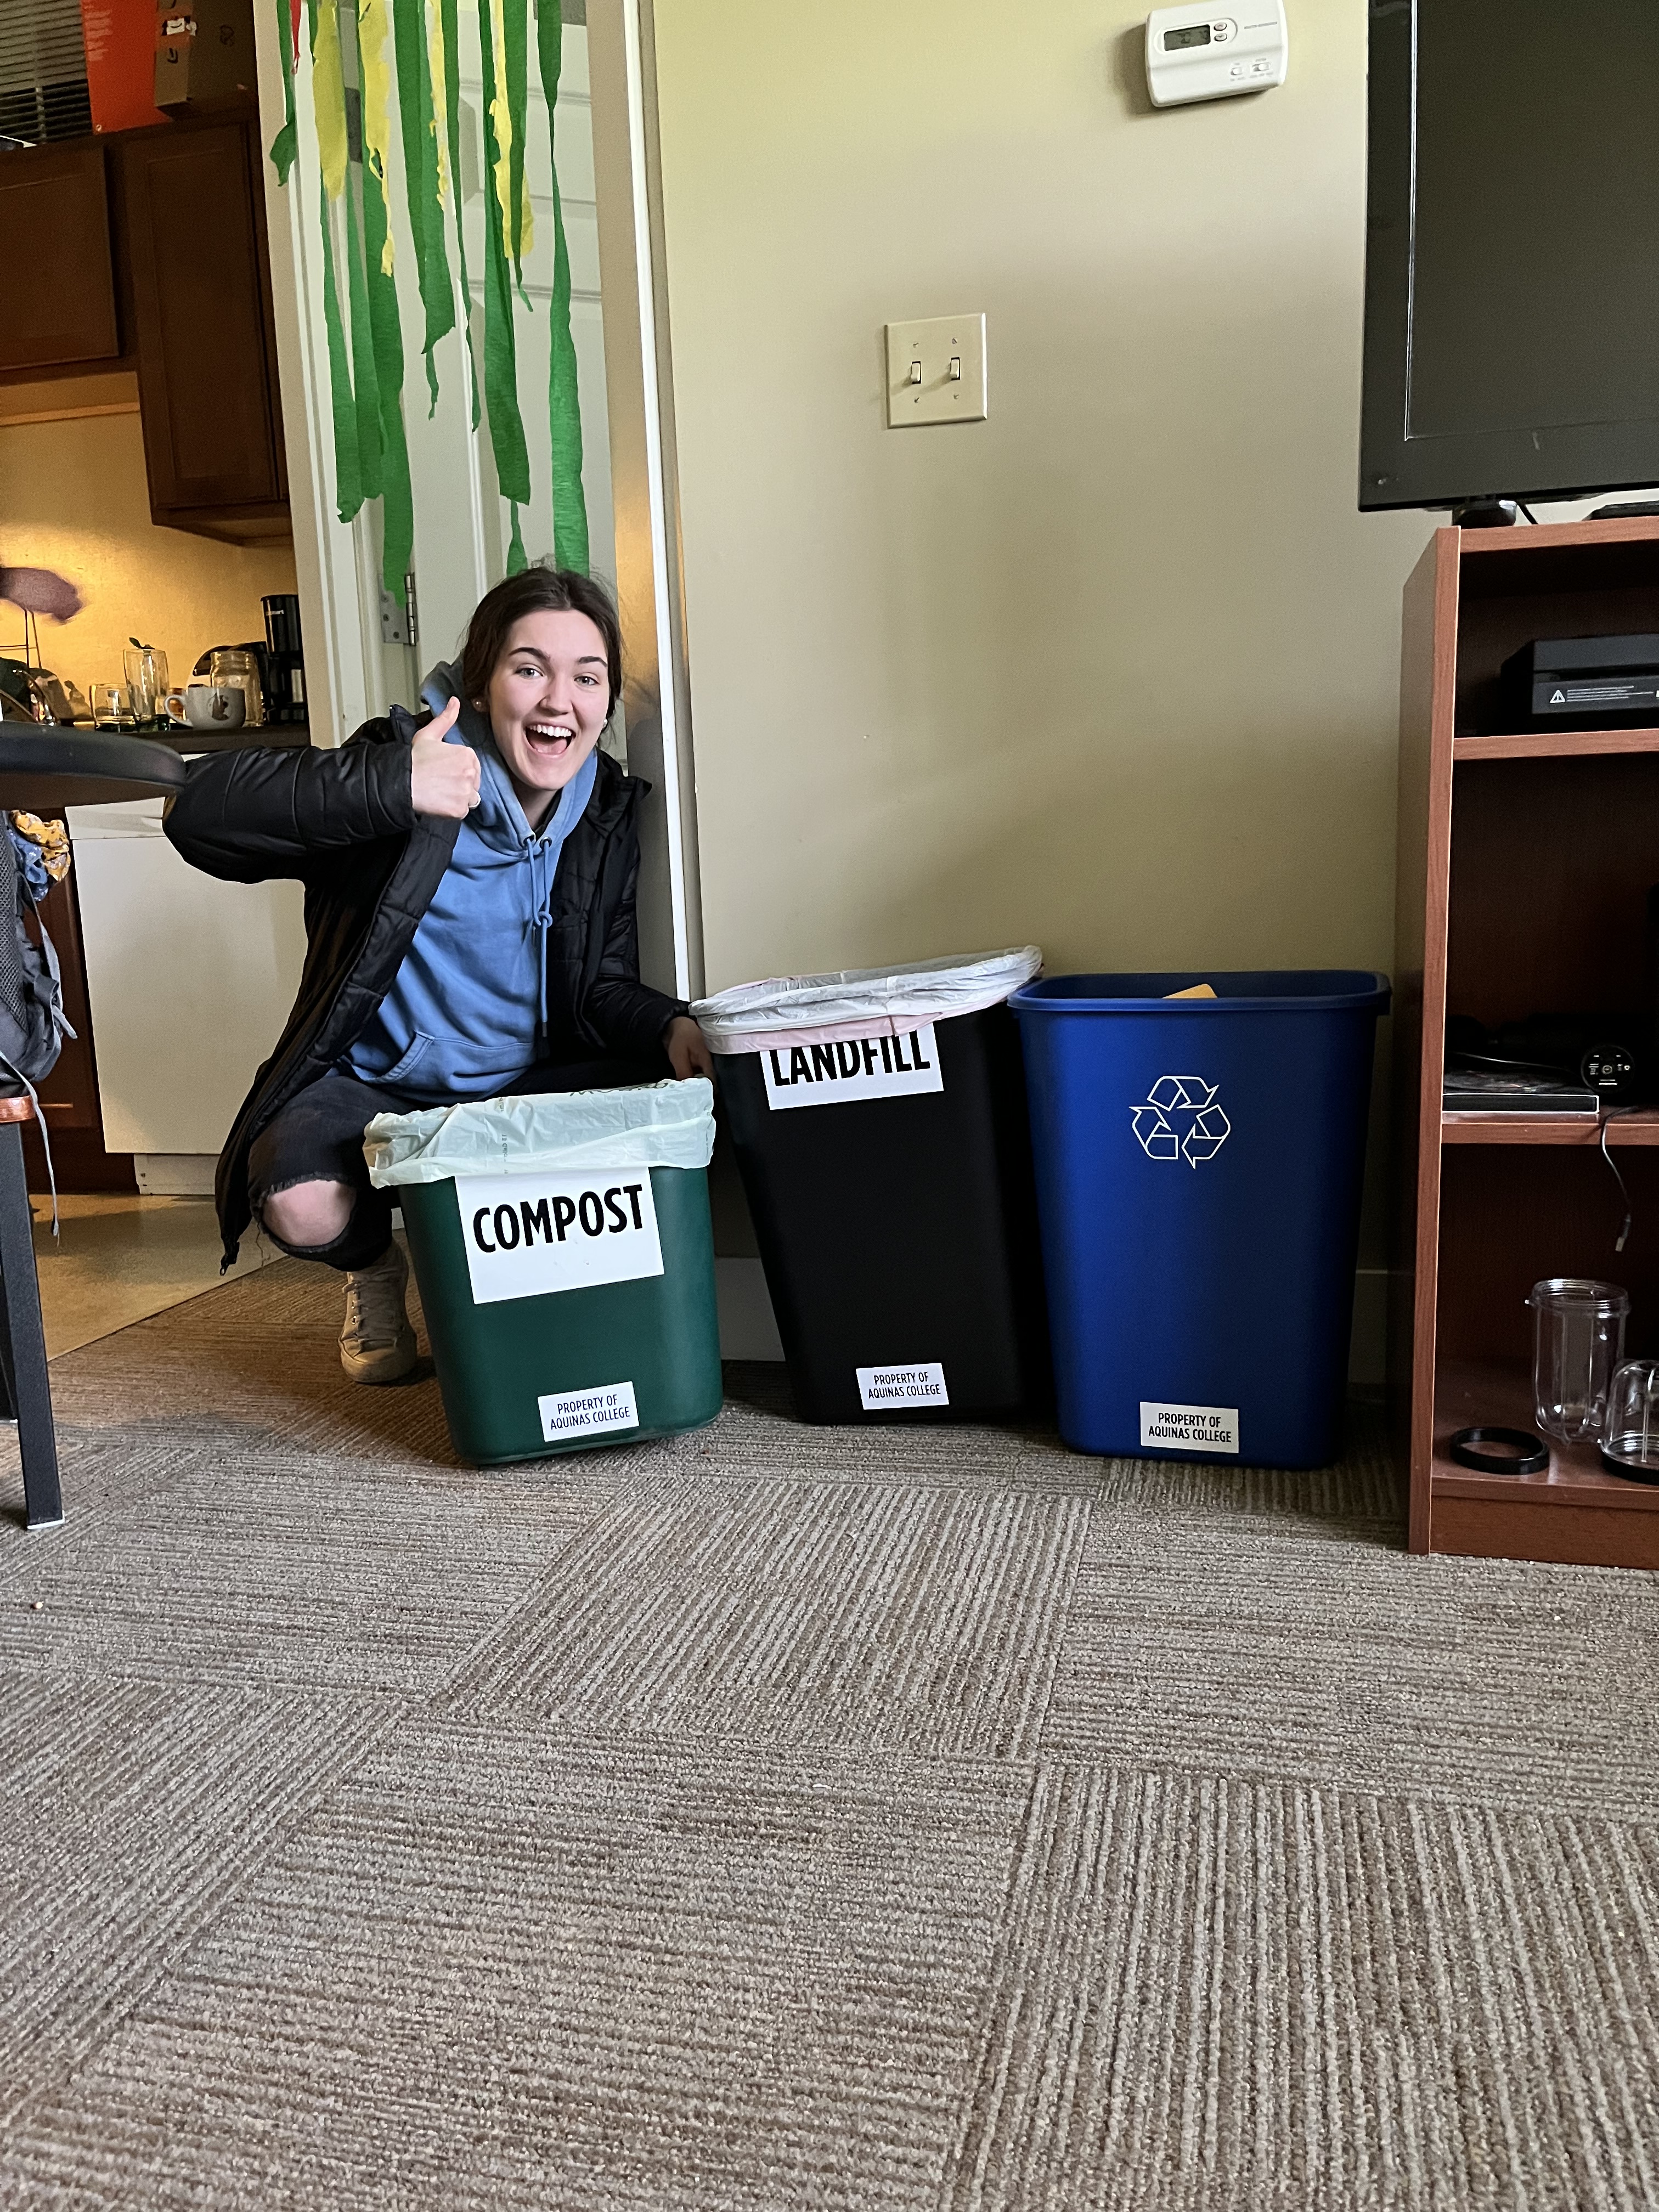 Student giving a thumbs up and sitting on the floor of their home or dorm with three bins labeled compost, landfill, and recycling. 